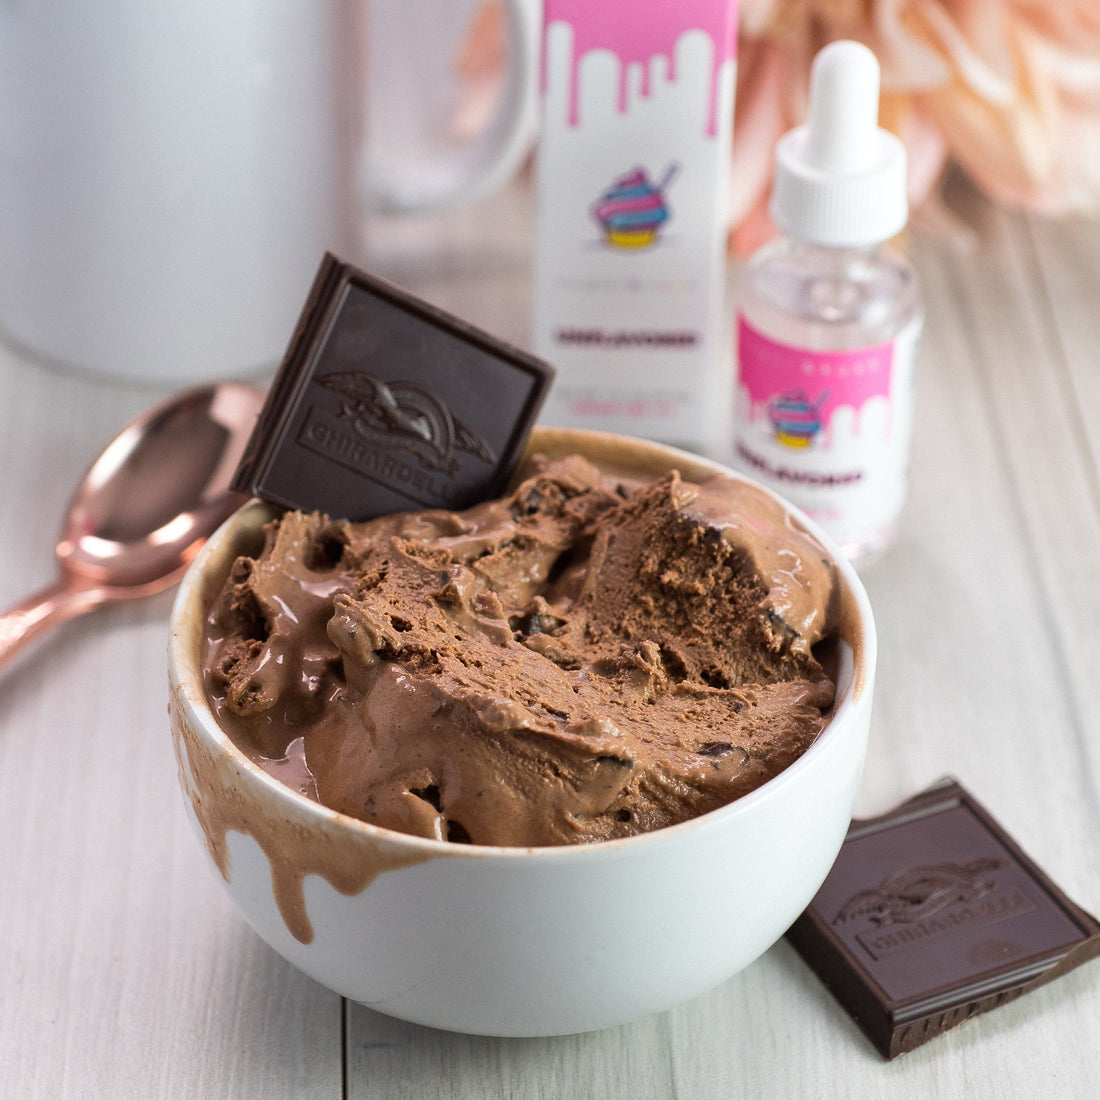 Decadent Chocolate Gelato from the Sugar and Kush best CBD Recipes section of our blog